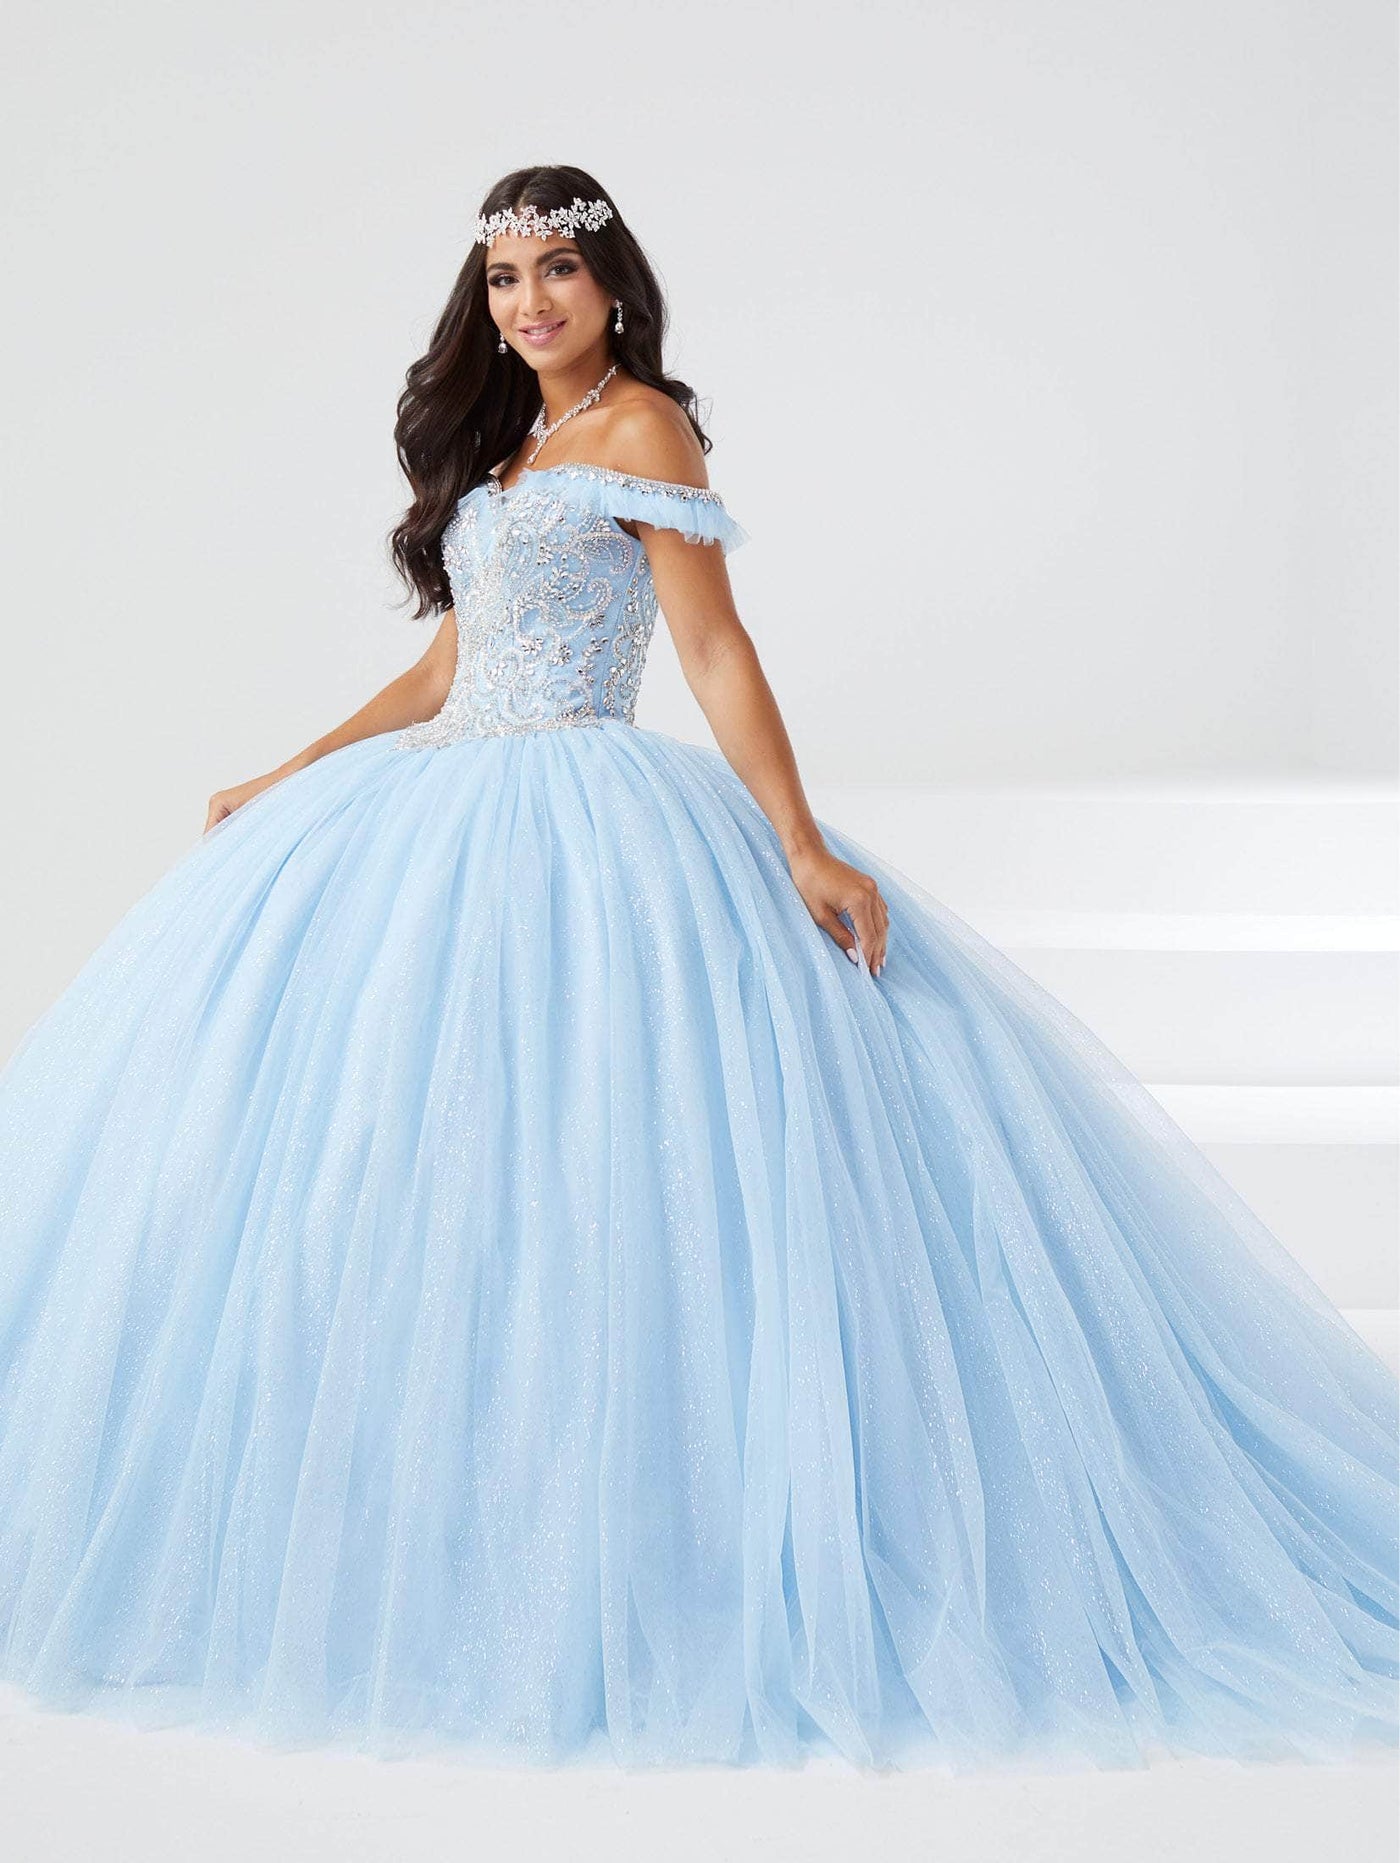 Fiesta Gowns 56460 - Tulle Sweet Glittered Ballgown Special Occasion Dress